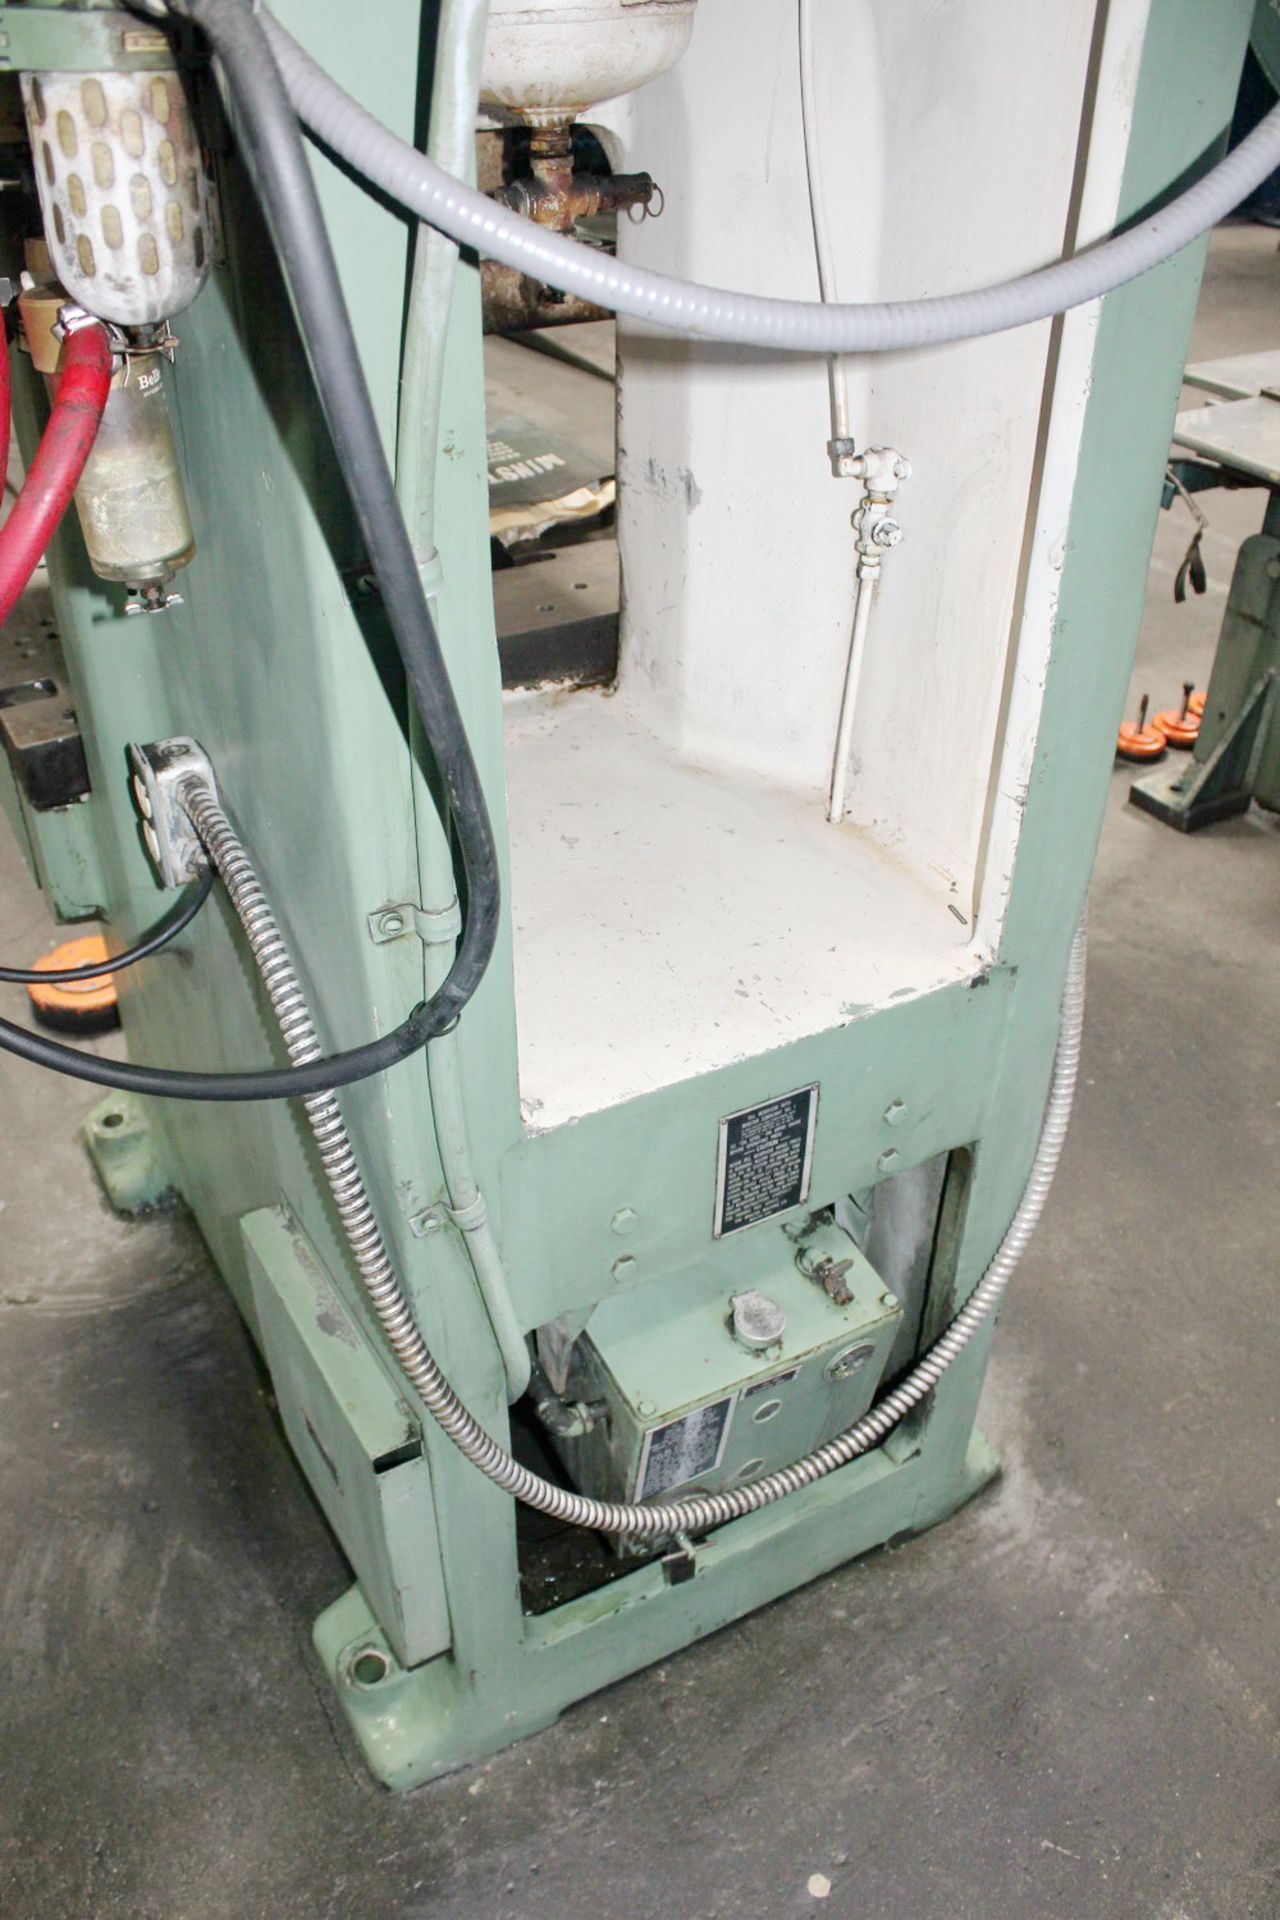 Minster 70-4 60 Ton Gap Frame Punch Press s/n 21611 w/ Minster Controls, Air Clutch, SOLD AS IS - Image 18 of 22